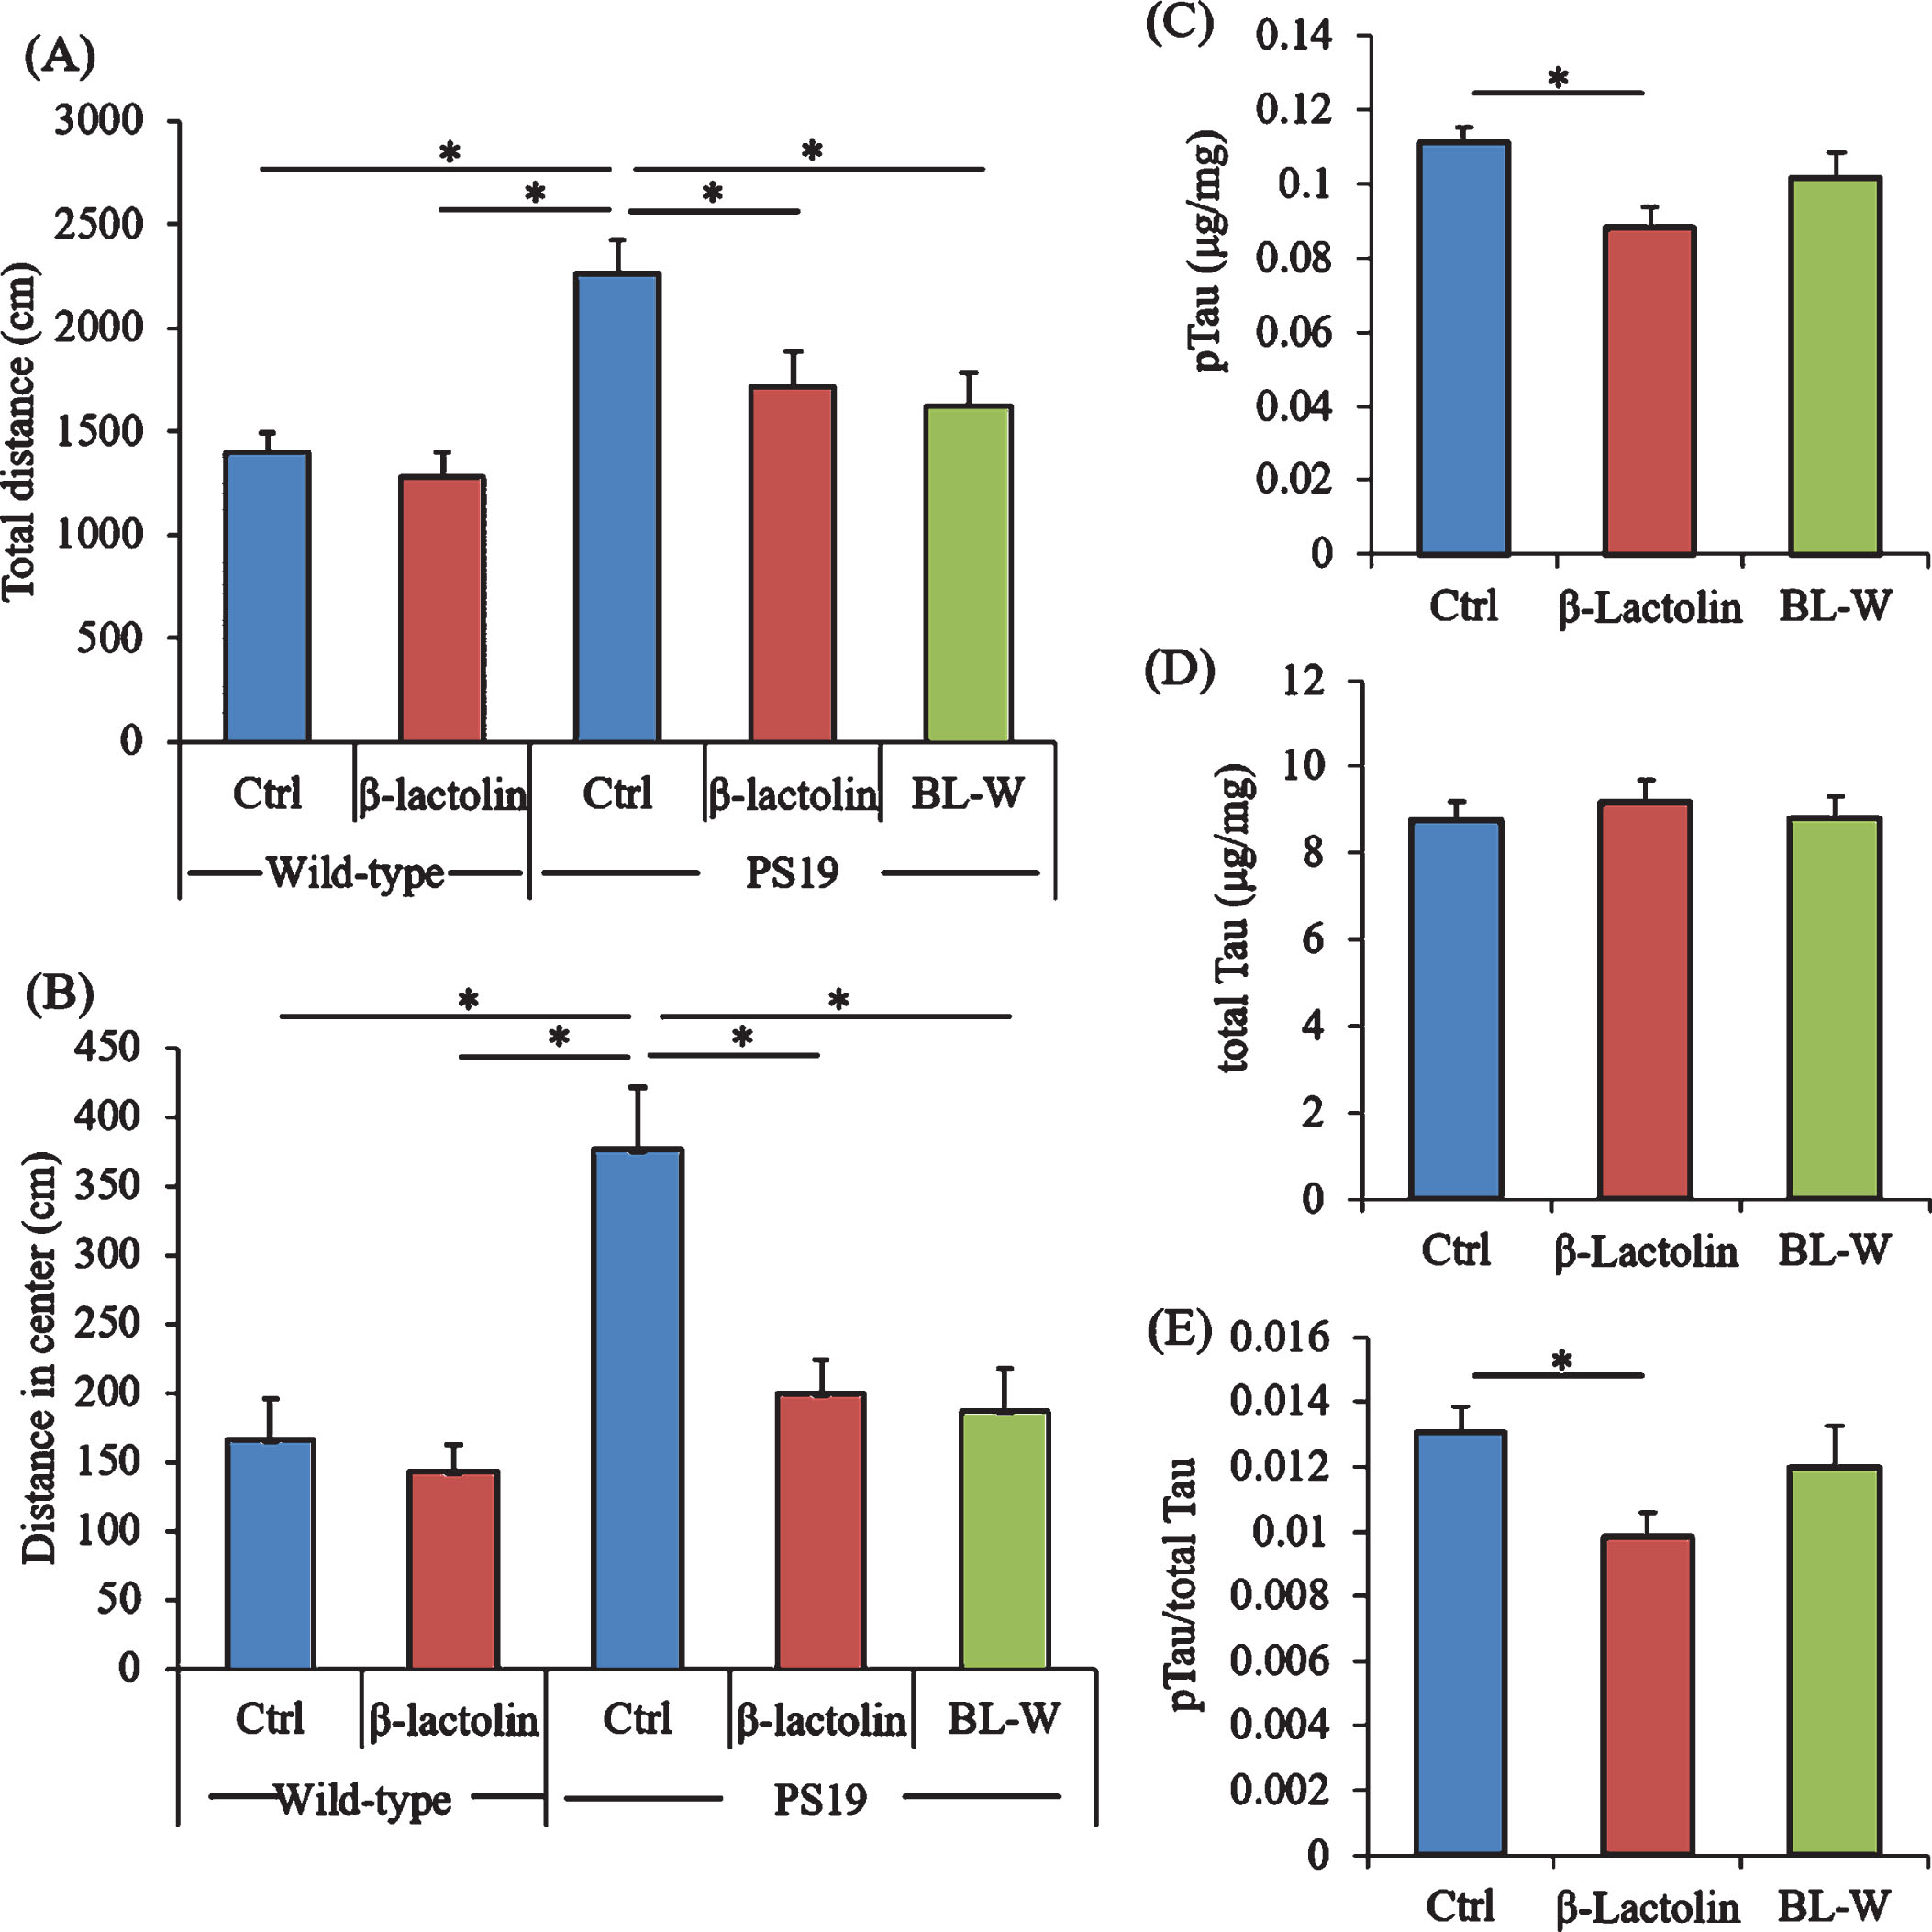 Effects of β-lactolin on memory function and tau accumulation in PS19 mice. Transgenic PS19 and wild-type male mice aged 3 months were fed a diet with or without 0.05% w/w β-lactolin or 5% w/w β-lactolin-rich whey enzymatic digestion (BL-W) for 6 months. Mice aged 9 months were subjected to the open field test to evaluate behavioral abnormality. A, B) The total distances in the open field (A) and in the center of the open field (B). C, D) The levels of phosphorylated tau (pTau, C) and total tau (D) in the cortex. E) The ratio of pTau to total tau. Data are presented as means±SEM (sample size: wild-type mice, 12; control transgenic mice, 11; transgenic mice fed with β-lactolin, 11; or transgenic mice fed with BL-W, 11). p-values shown in the graph were calculated by one-way ANOVA followed by the Tukey–Kramer test. *p < 0.05.